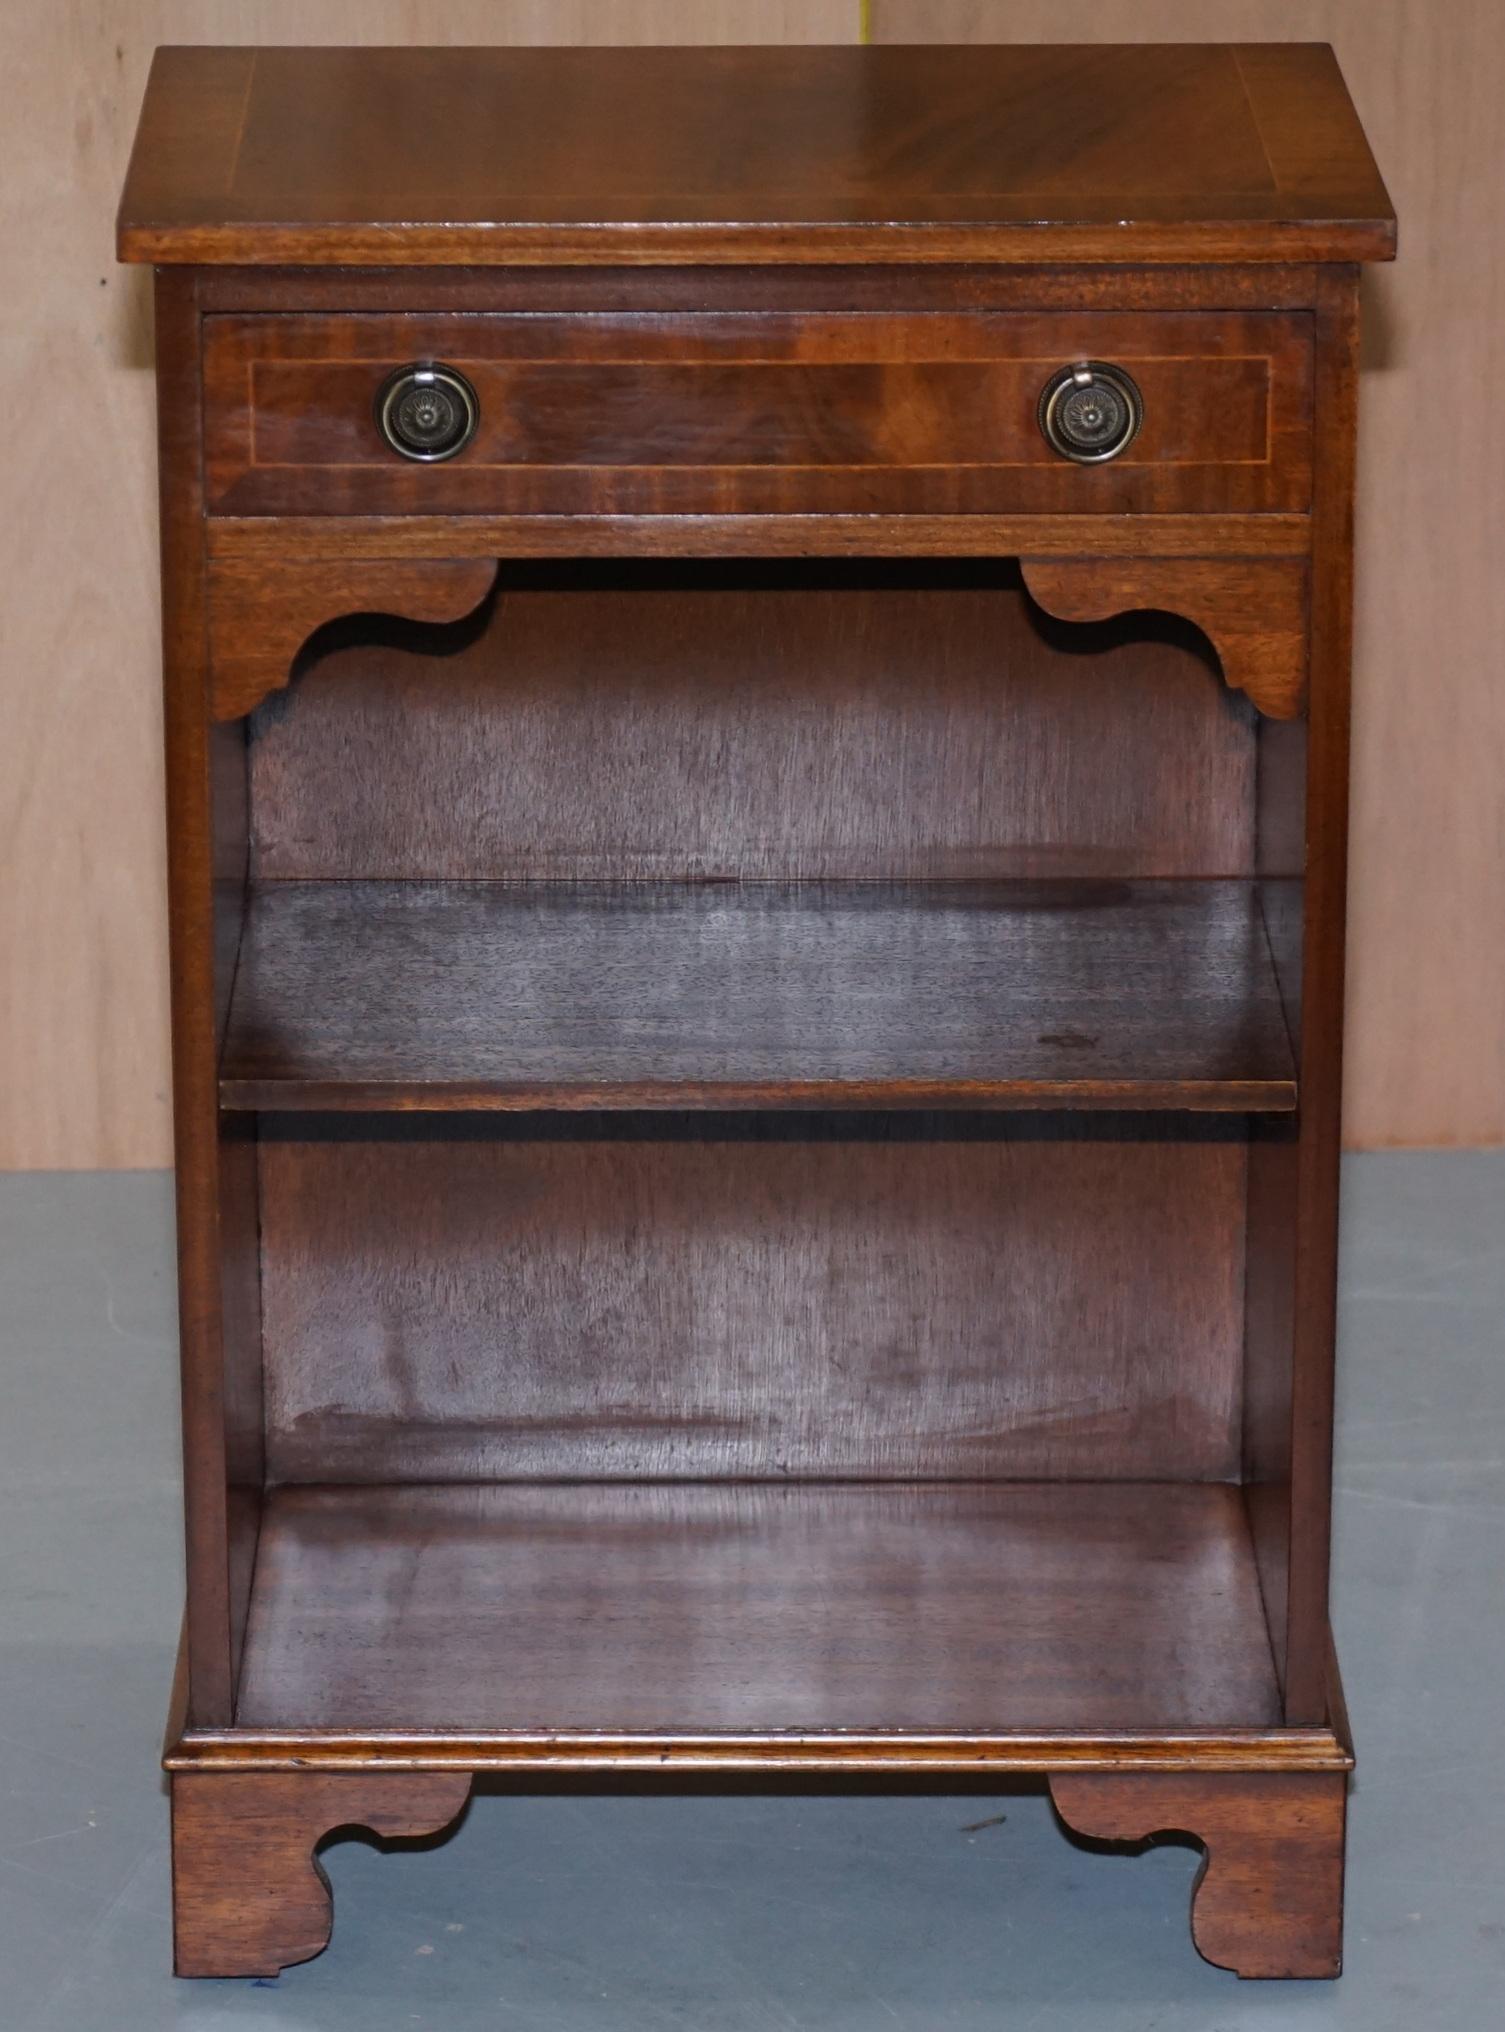 We are delighted to offer for sale this lovely hand made in England Bevan Funnell Flamed Mahogany small side table sized cabinet with single drawer

A good looking and functional piece of furniture, the shelf offers some bookcase or trinket